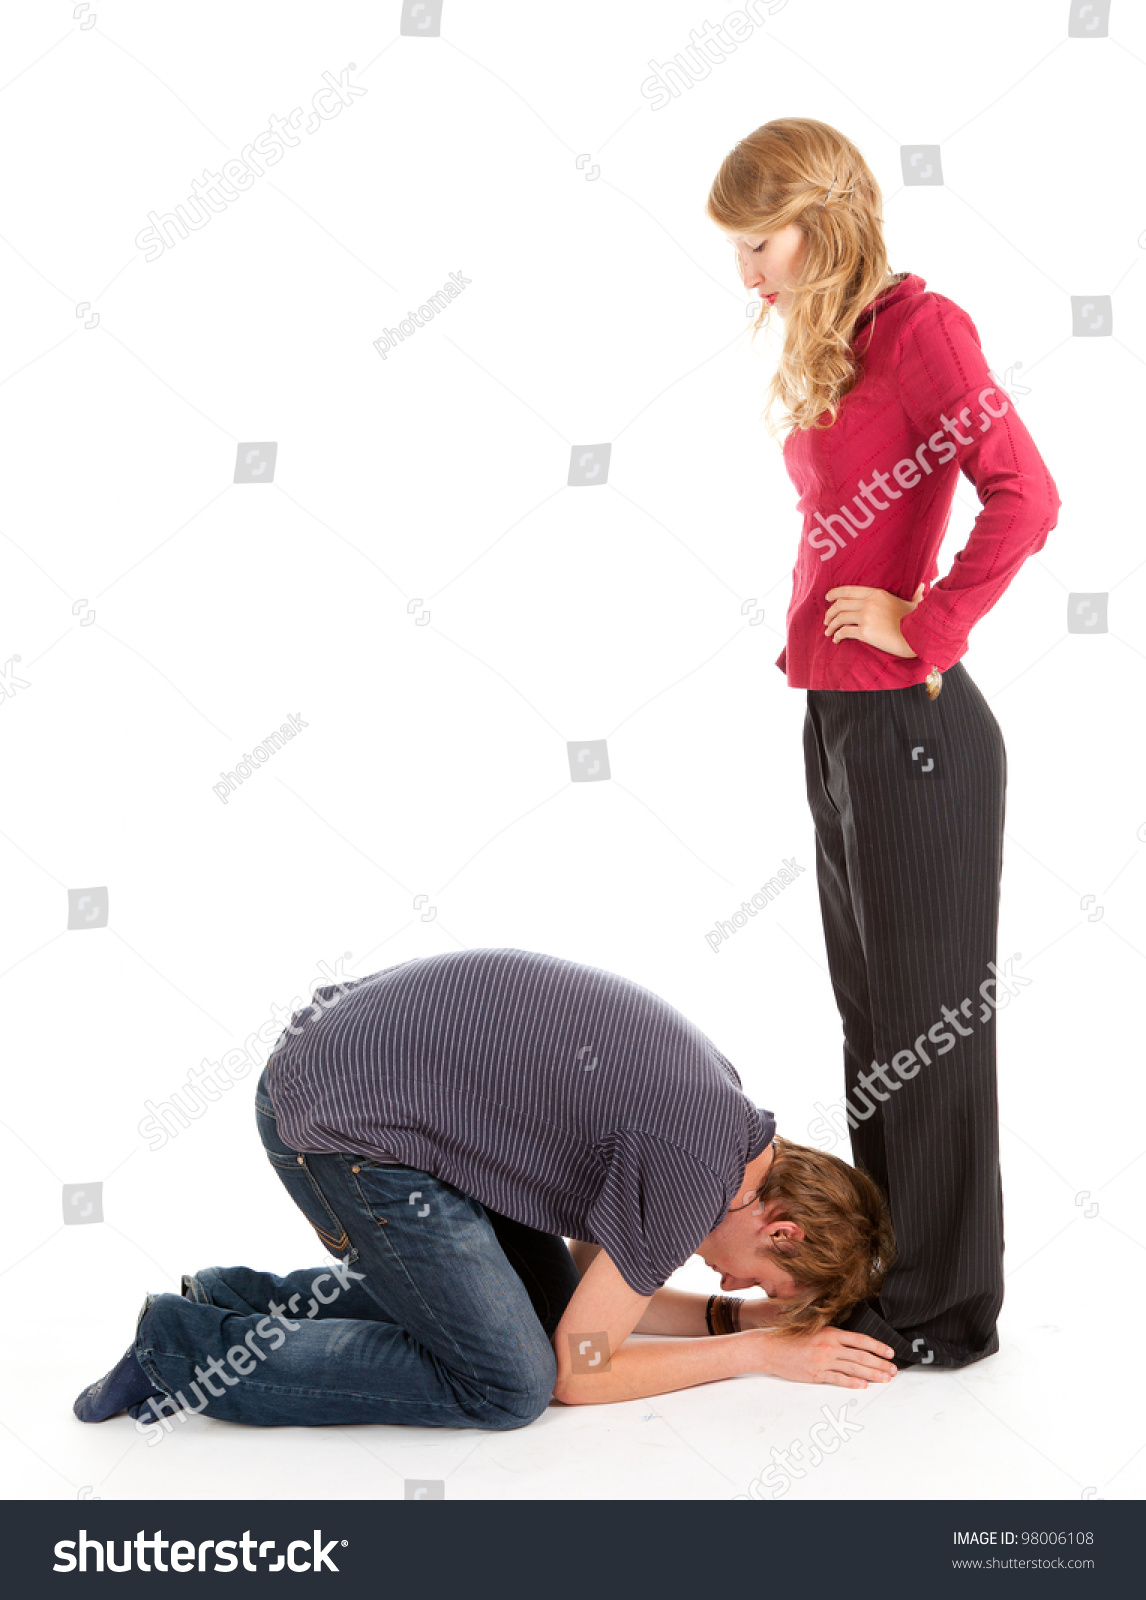 https://image.shutterstock.com/shutterstock/photos/98006108/display_1500/stock-photo-young-man-and-woman-he-kneeling-before-she-white-background-98006108.jpg